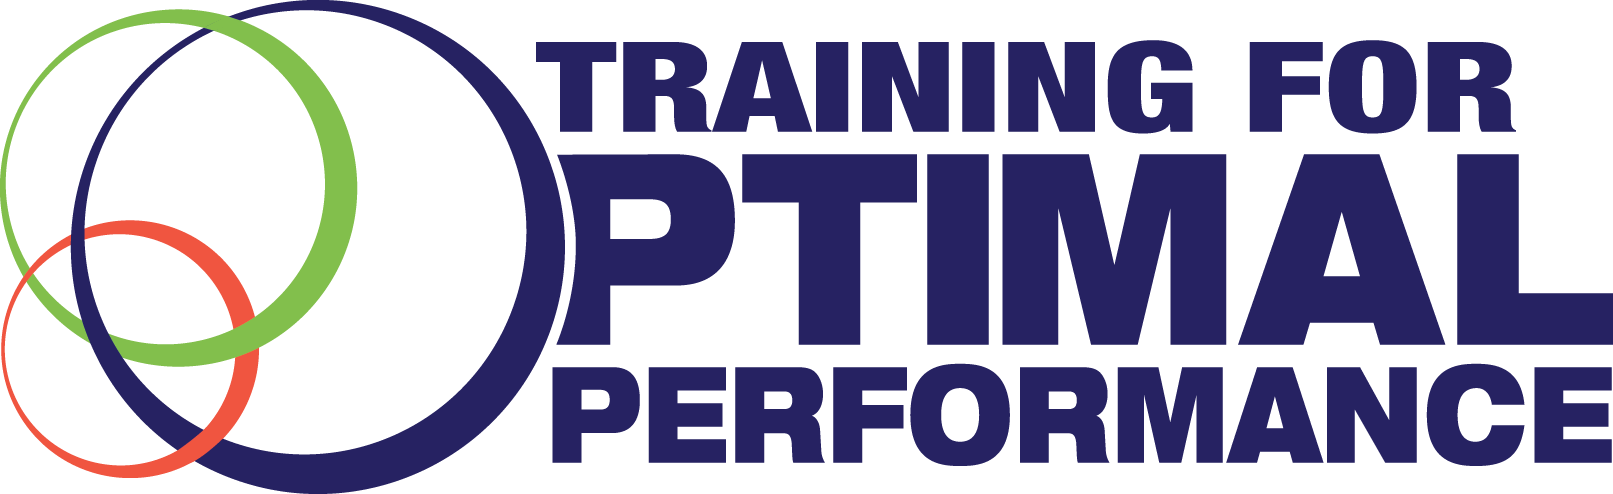 Sports Psychologist and founder of Training for Optimal Performance, Dr. Shannon Reece teaches athletes, performers, business owners and everyday people how to play, work and live great using her proven mental formula. 

Her tactics have helped thousands of clients, of all levels, experience dramatic improvement by eliminating interference and leveraging their assets into championship form.
